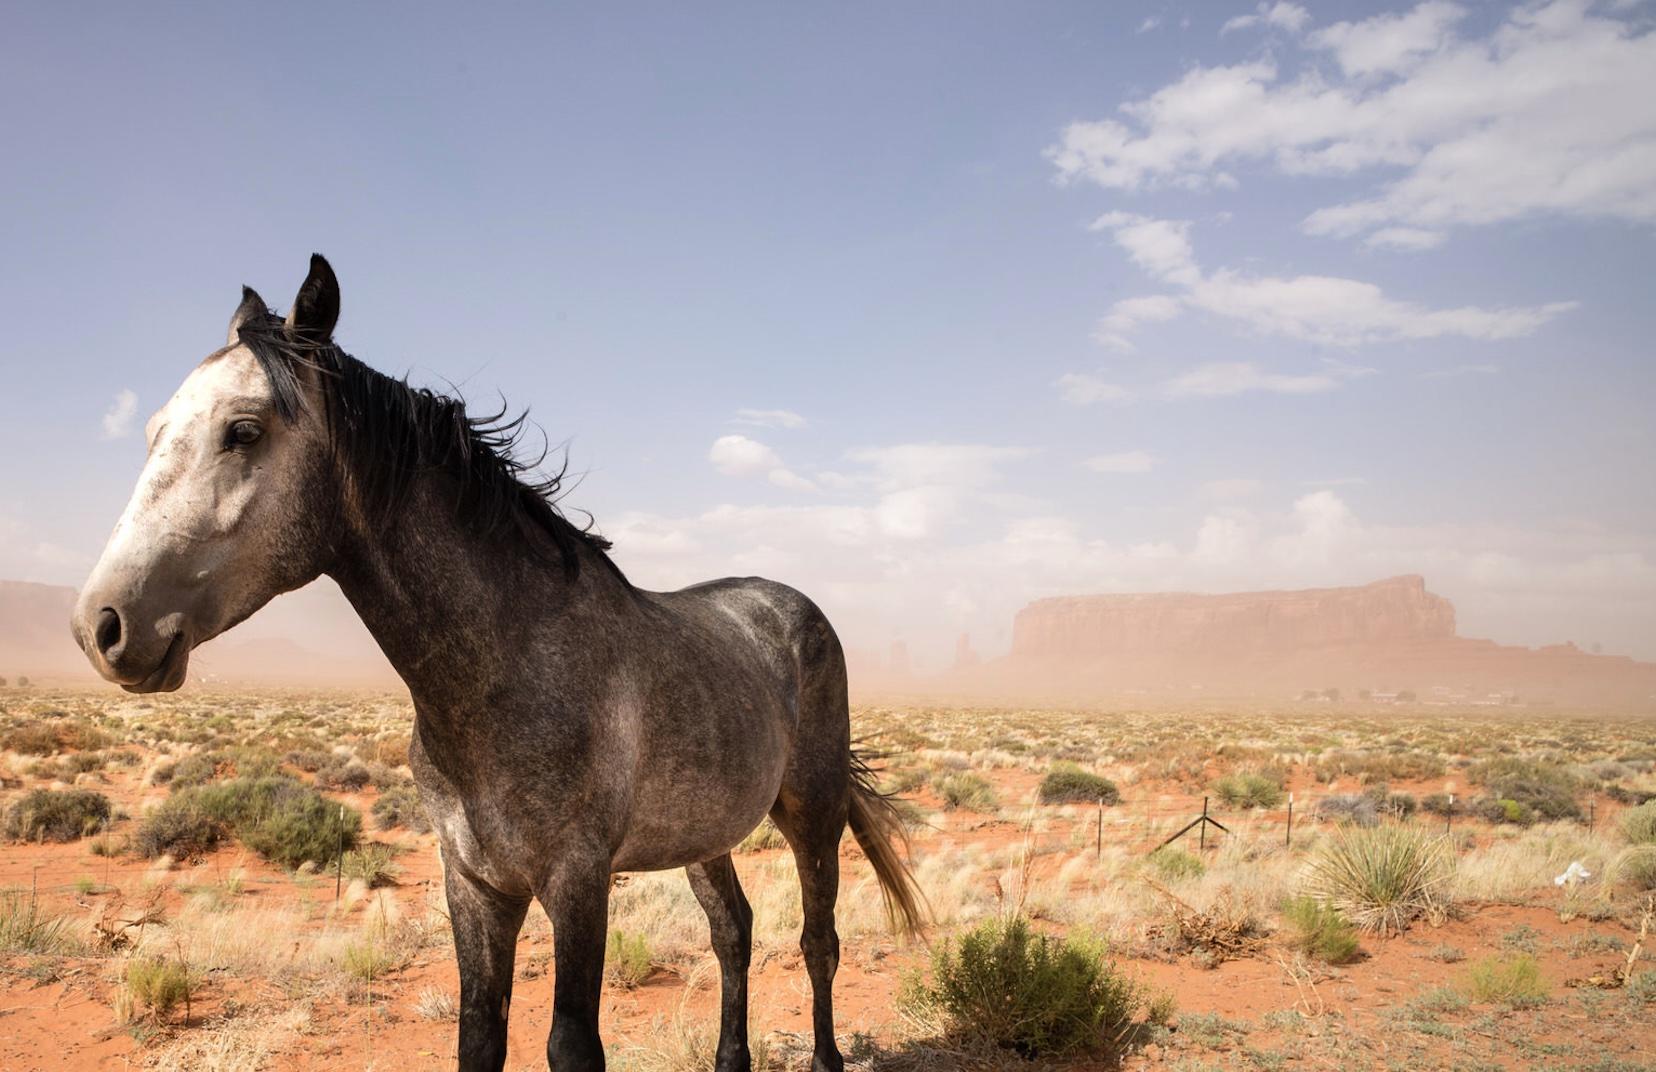 Wild West Horse, 2017, Monument Valley, AZ, USA - Contemporary Photograph by Philippe Blayo